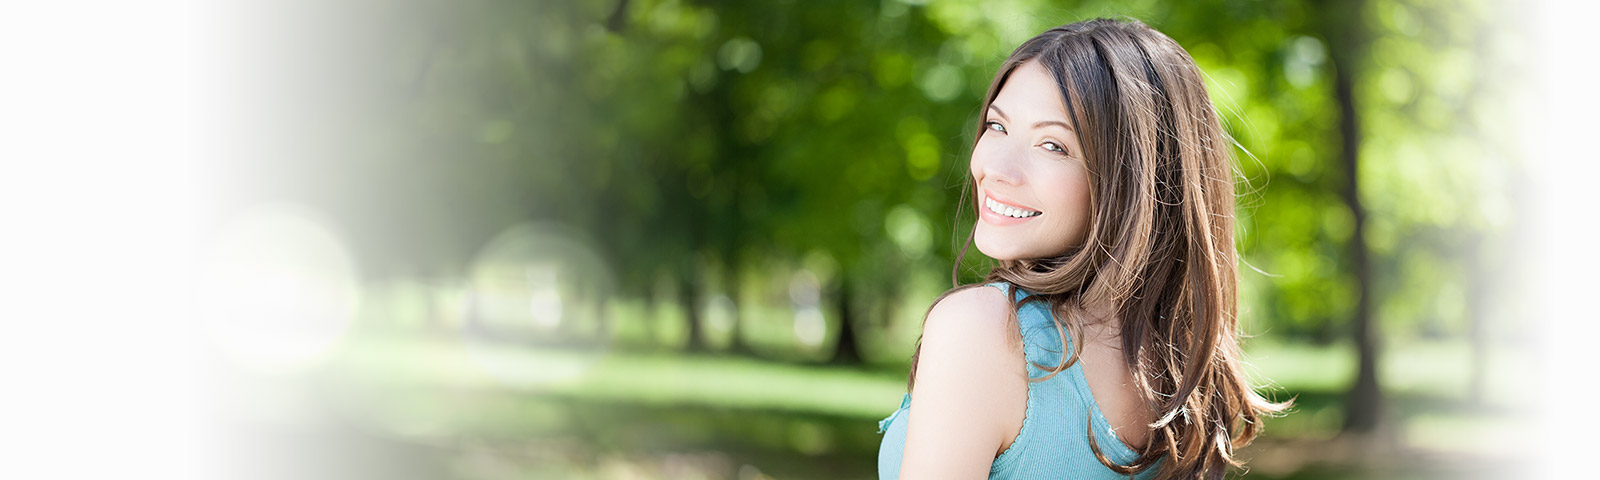 Beautiful woman smiling at you in a park